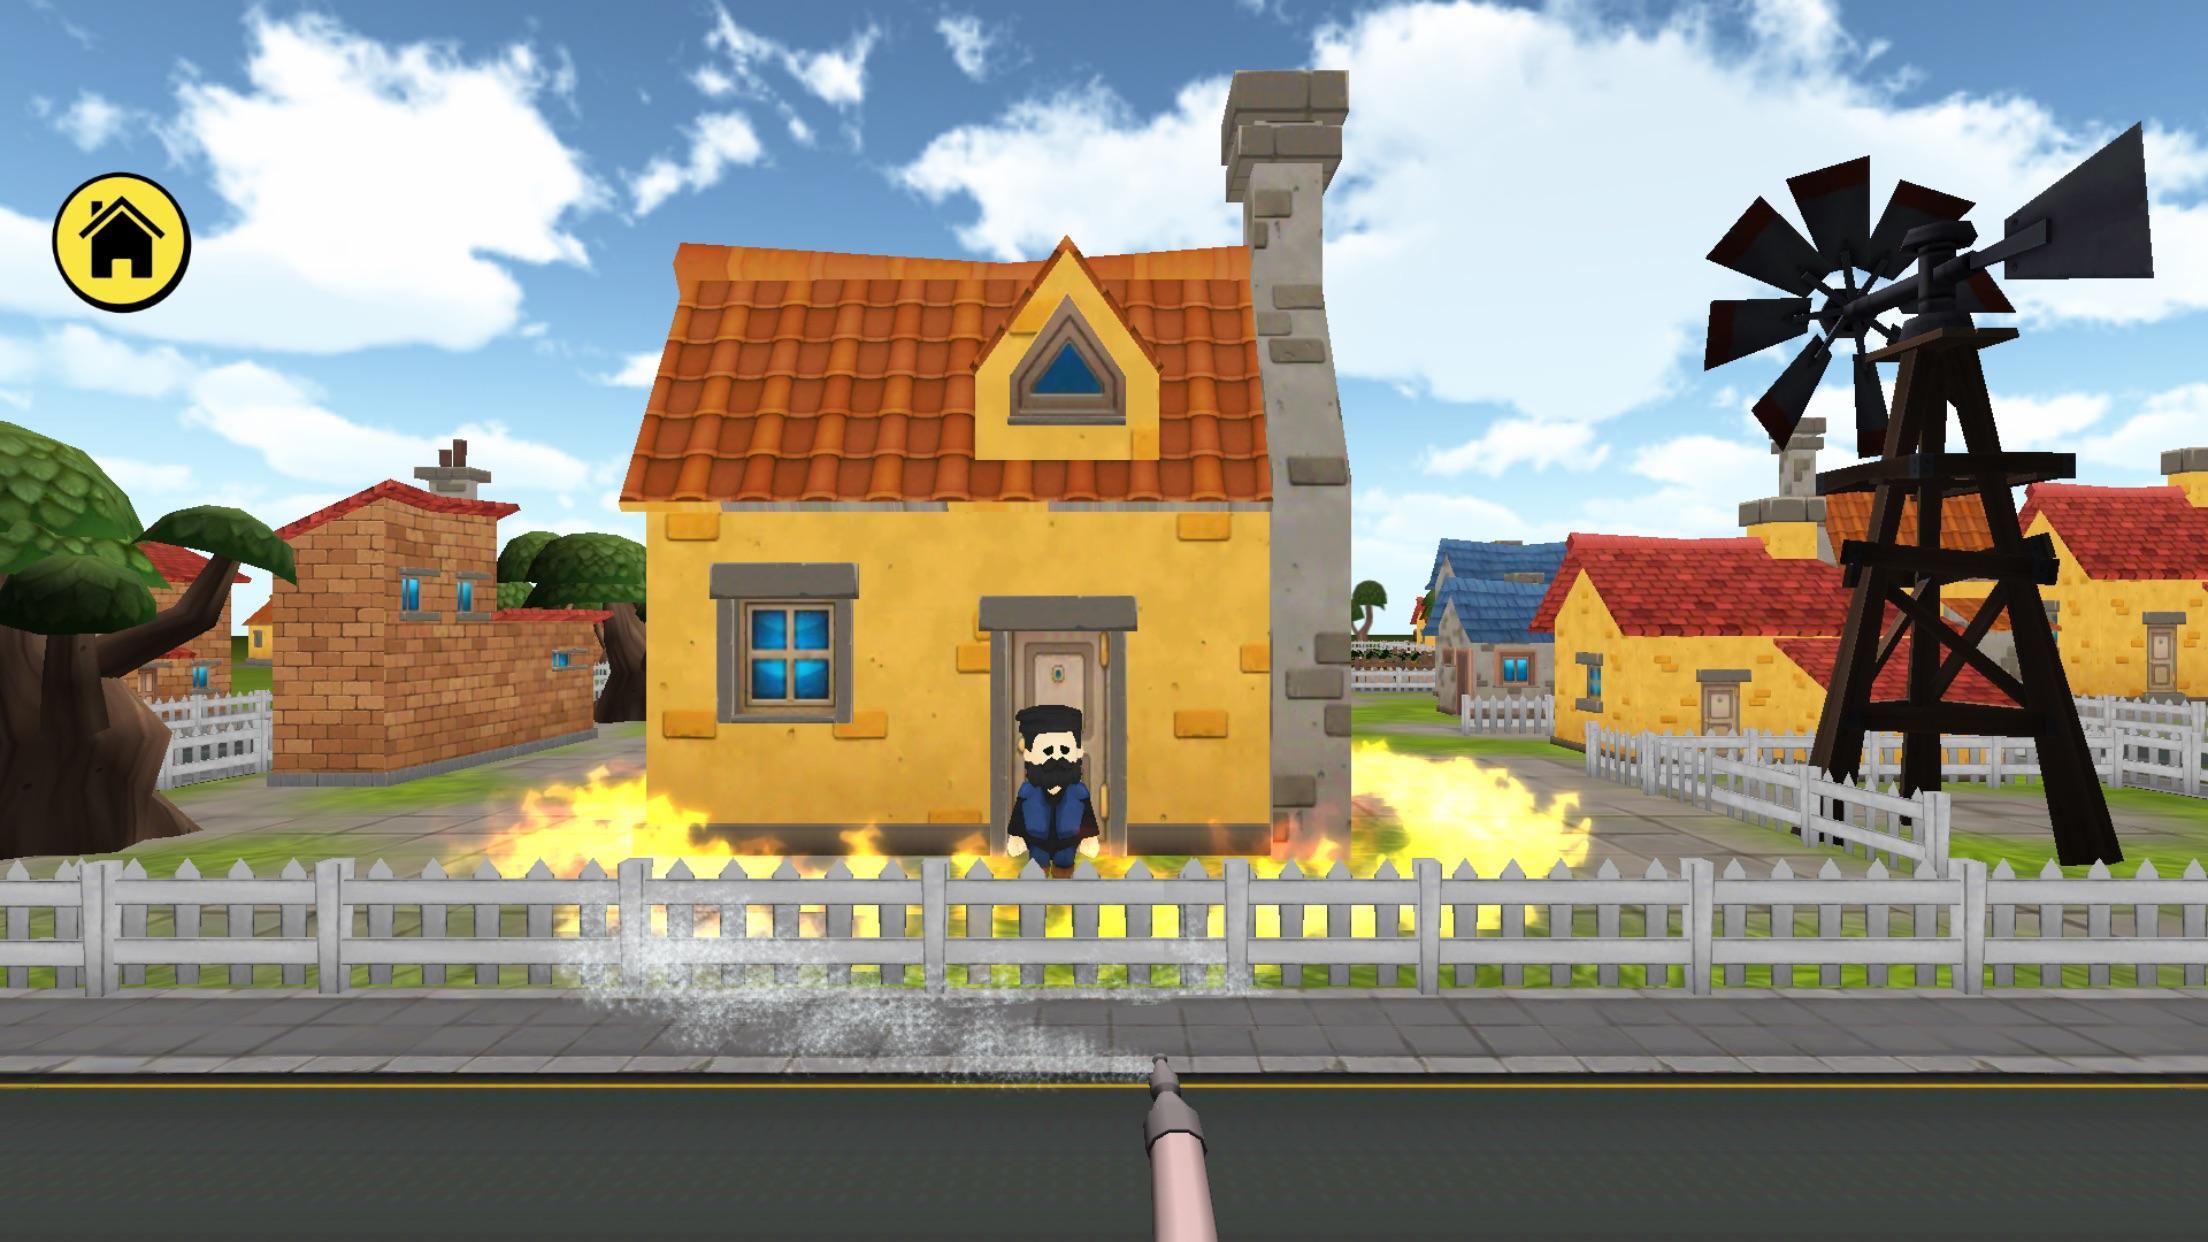 Kidlo Fire Fighter - Free 3D Rescue Game For Kids 1.8 Screenshot 4